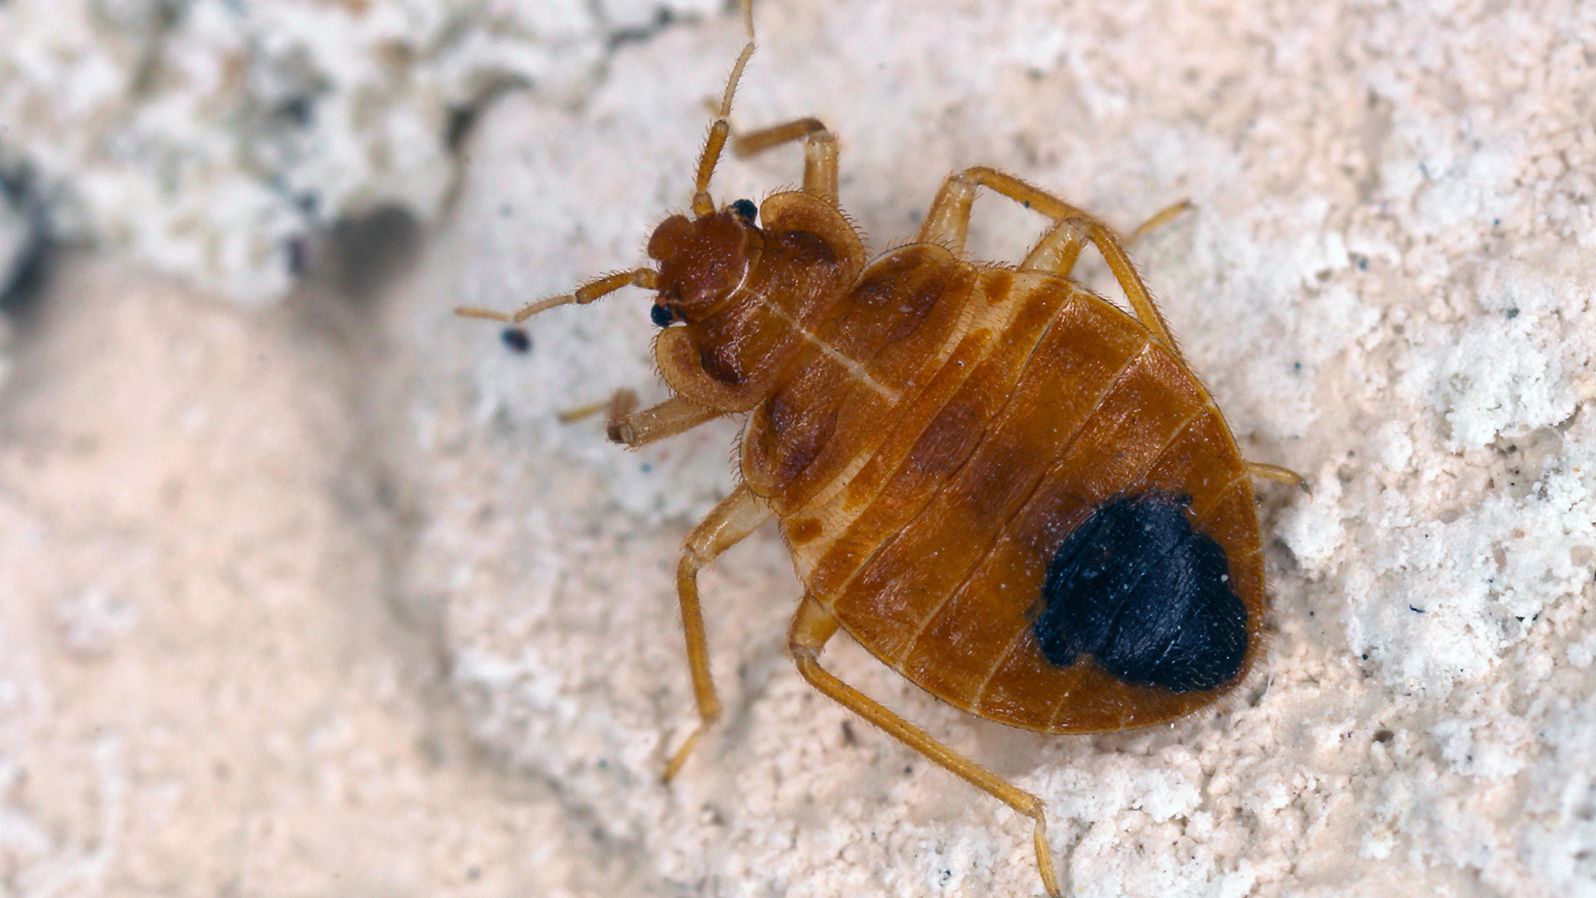 Bed bug prevention and control in the home